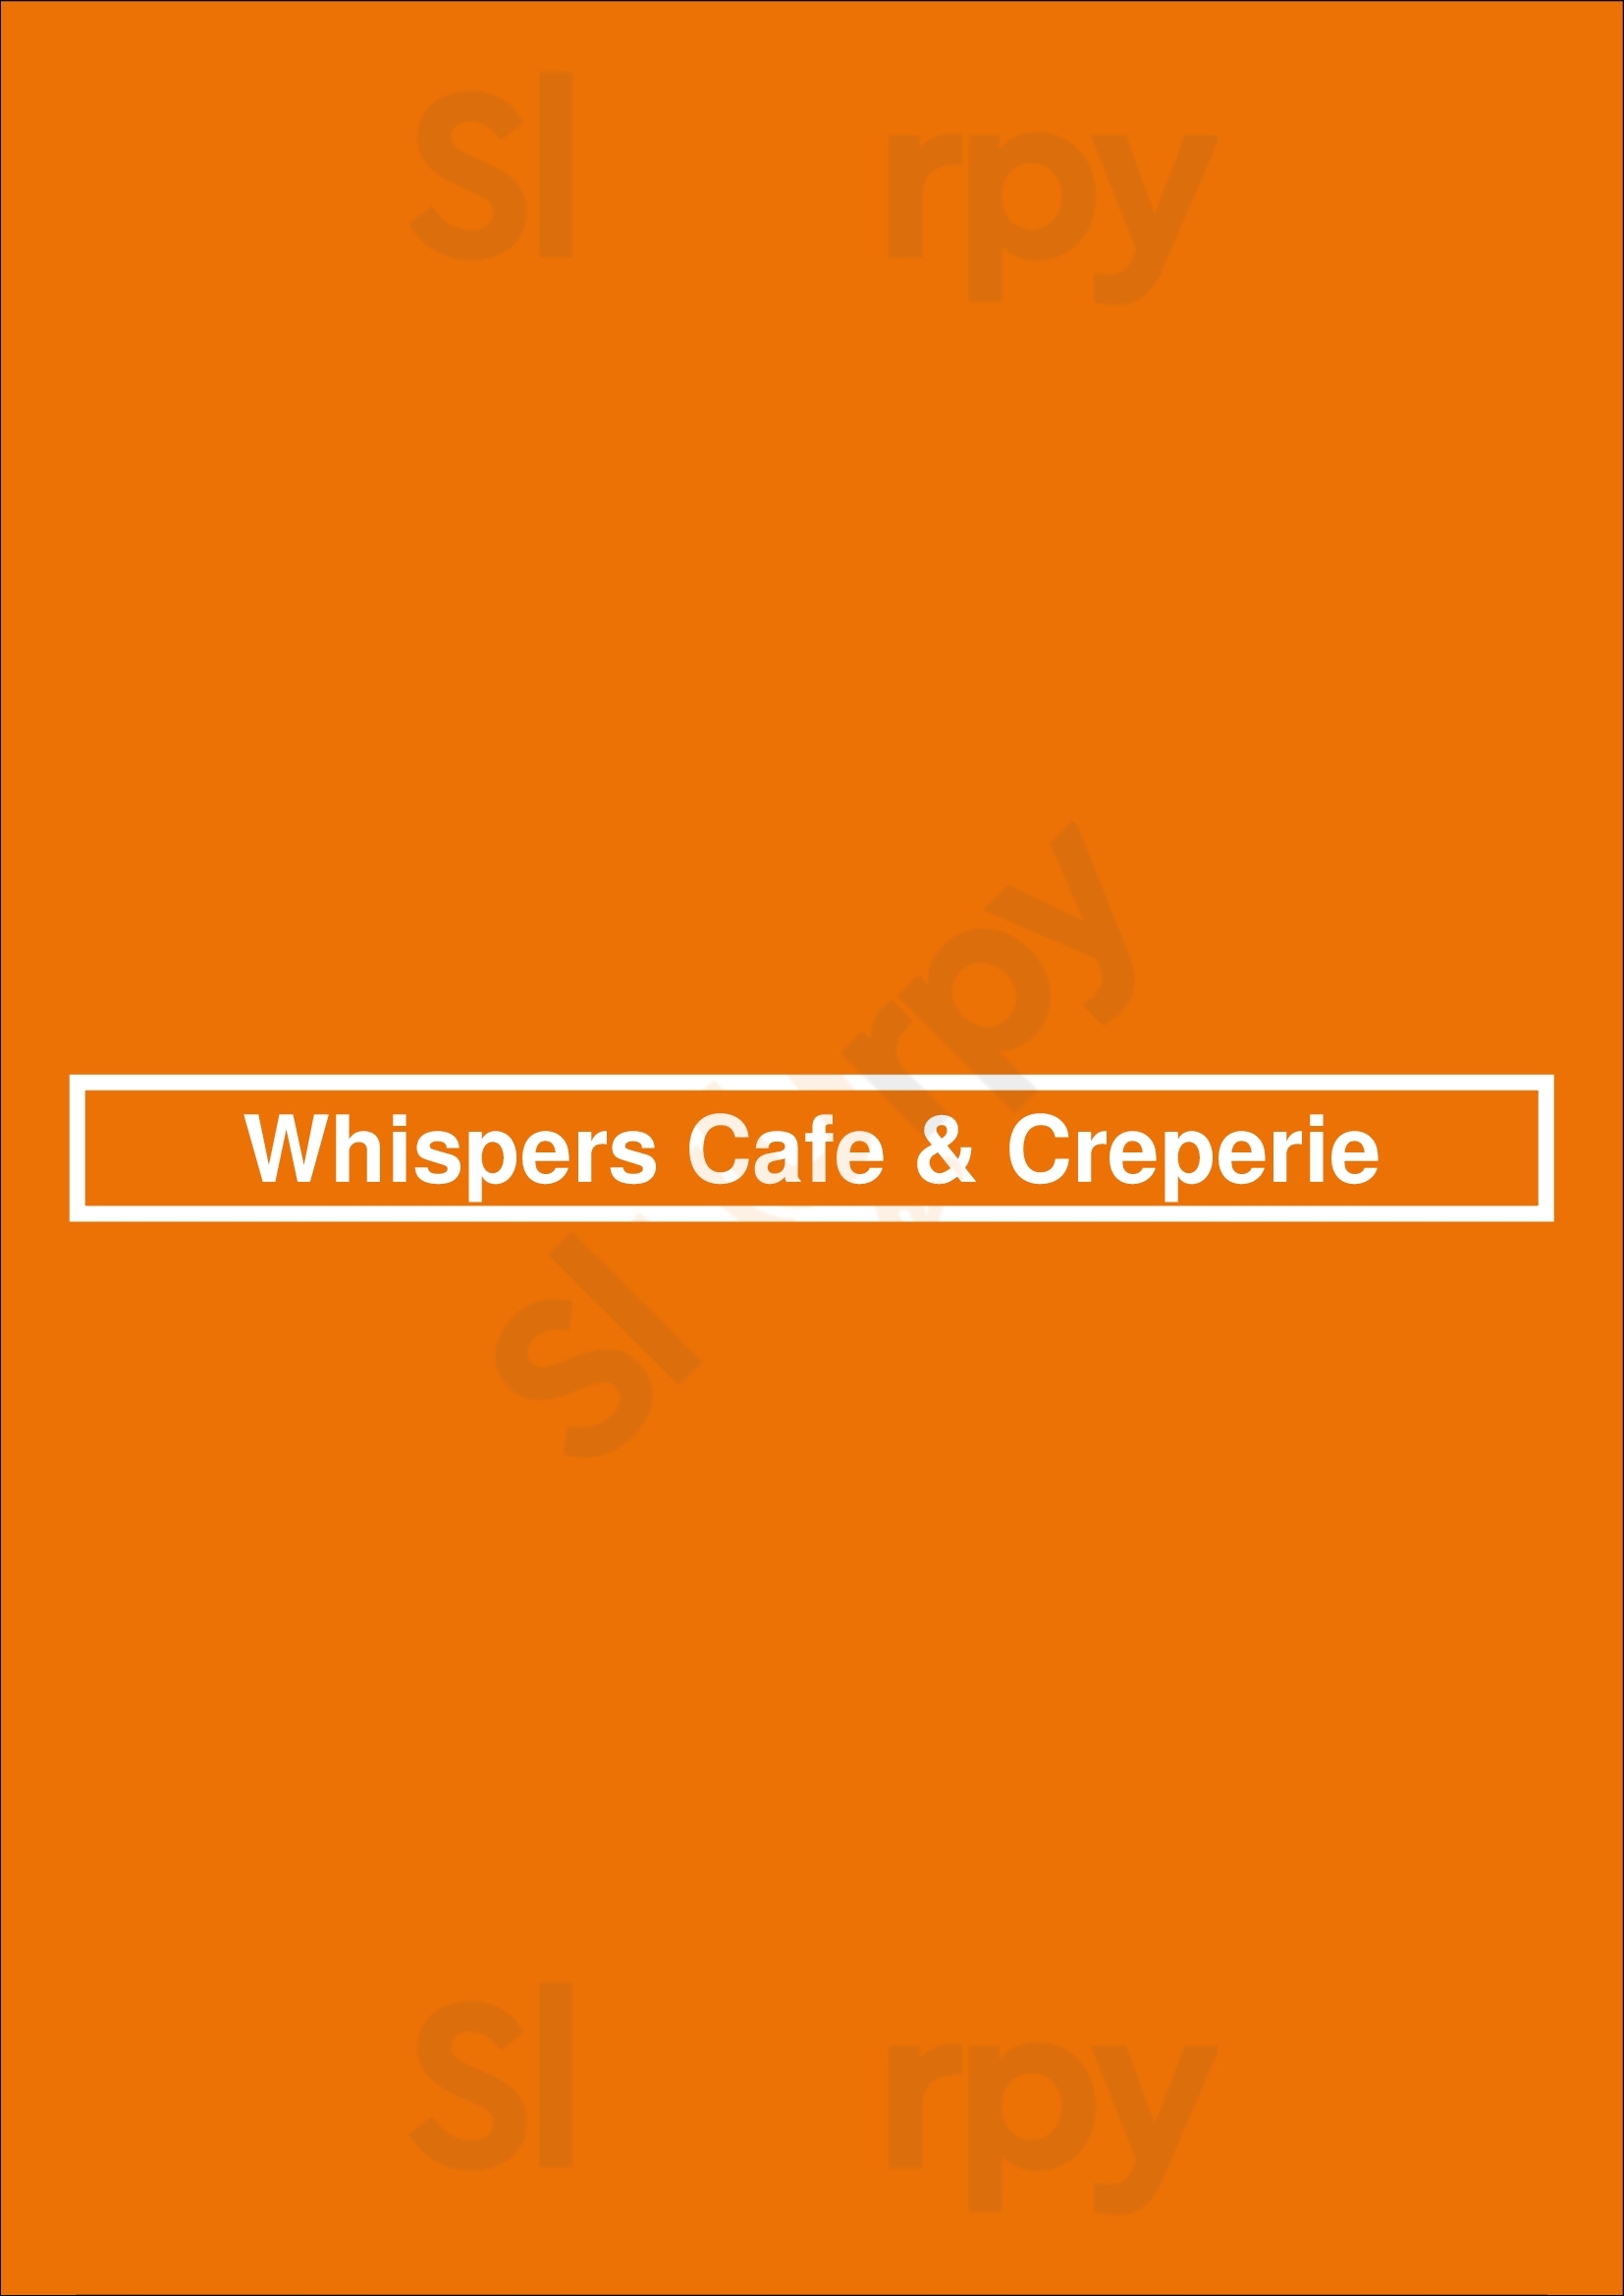 Whispers Cafe & Creperie Belmont Menu - 1